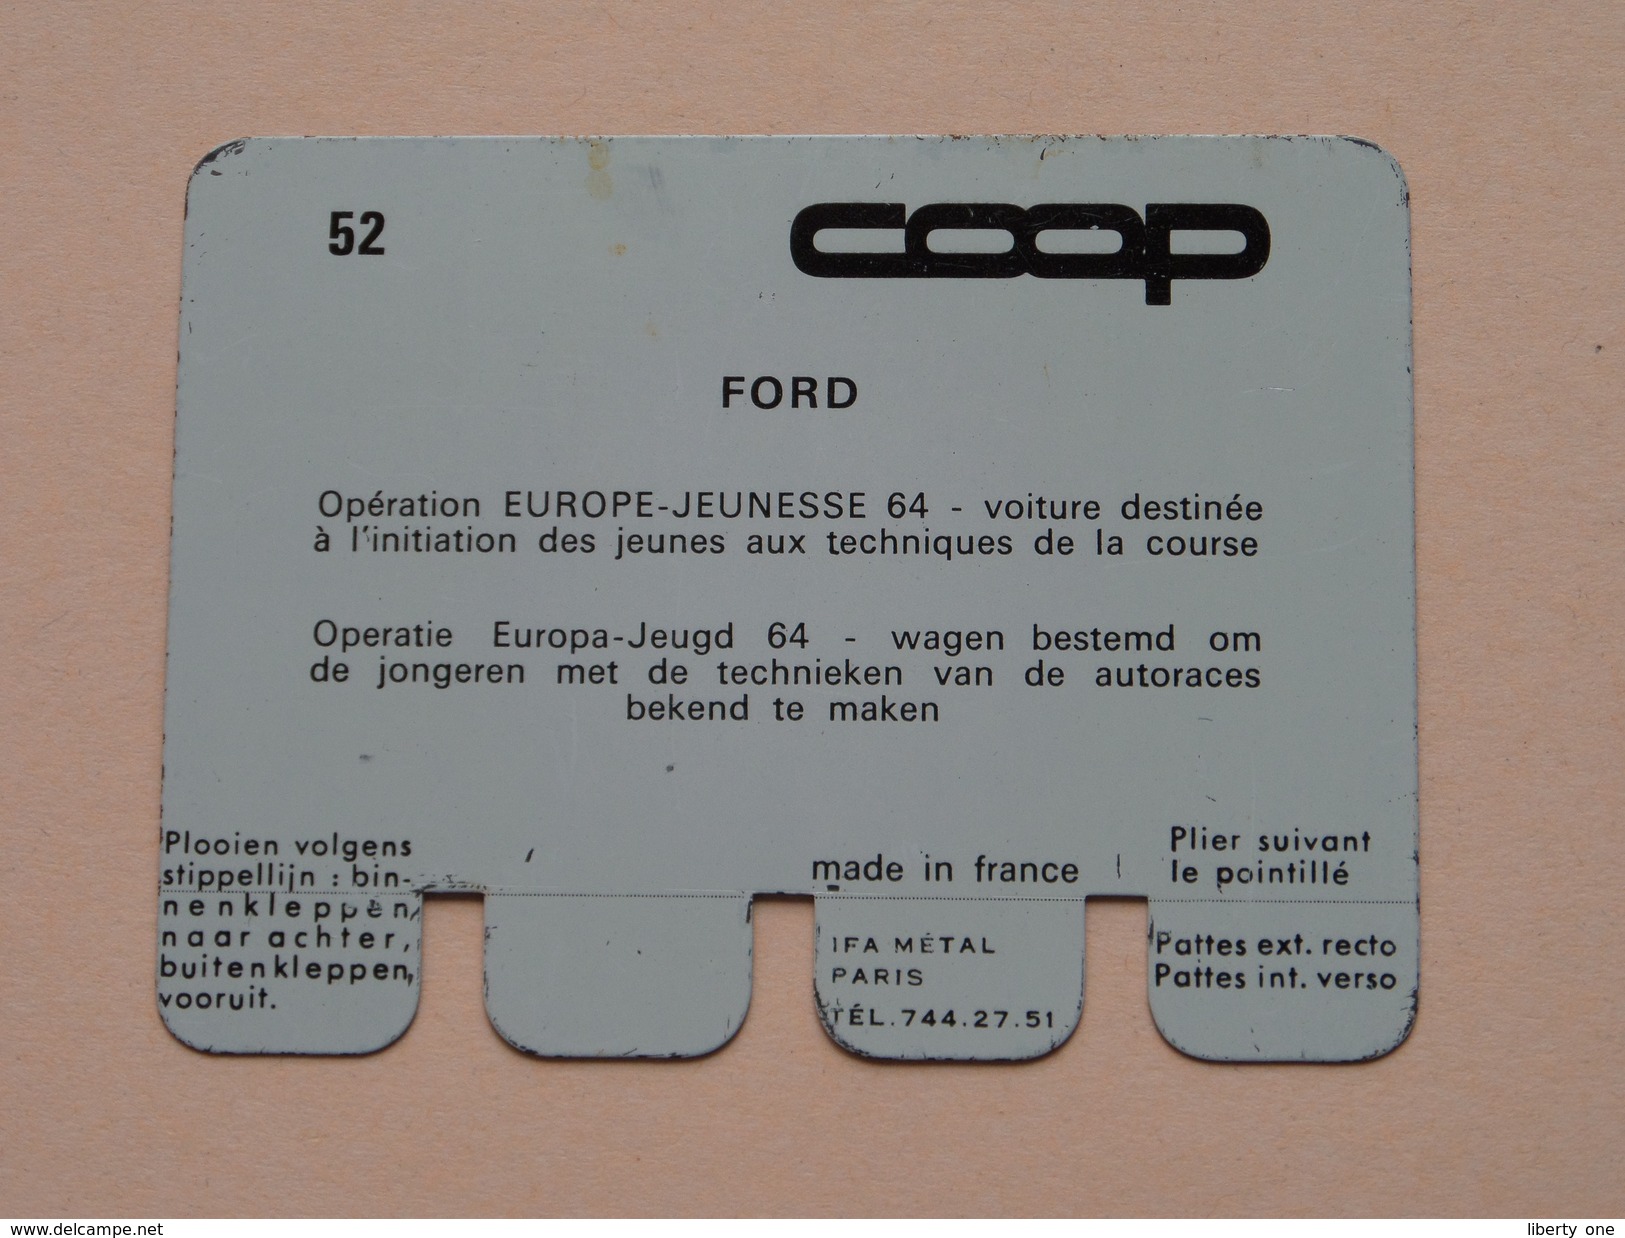 FORD - Coll. N° 52 NL/FR ( Plaquette C O O P - Voir Photo - IFA Metal Paris ) ! - Tin Signs (after1960)